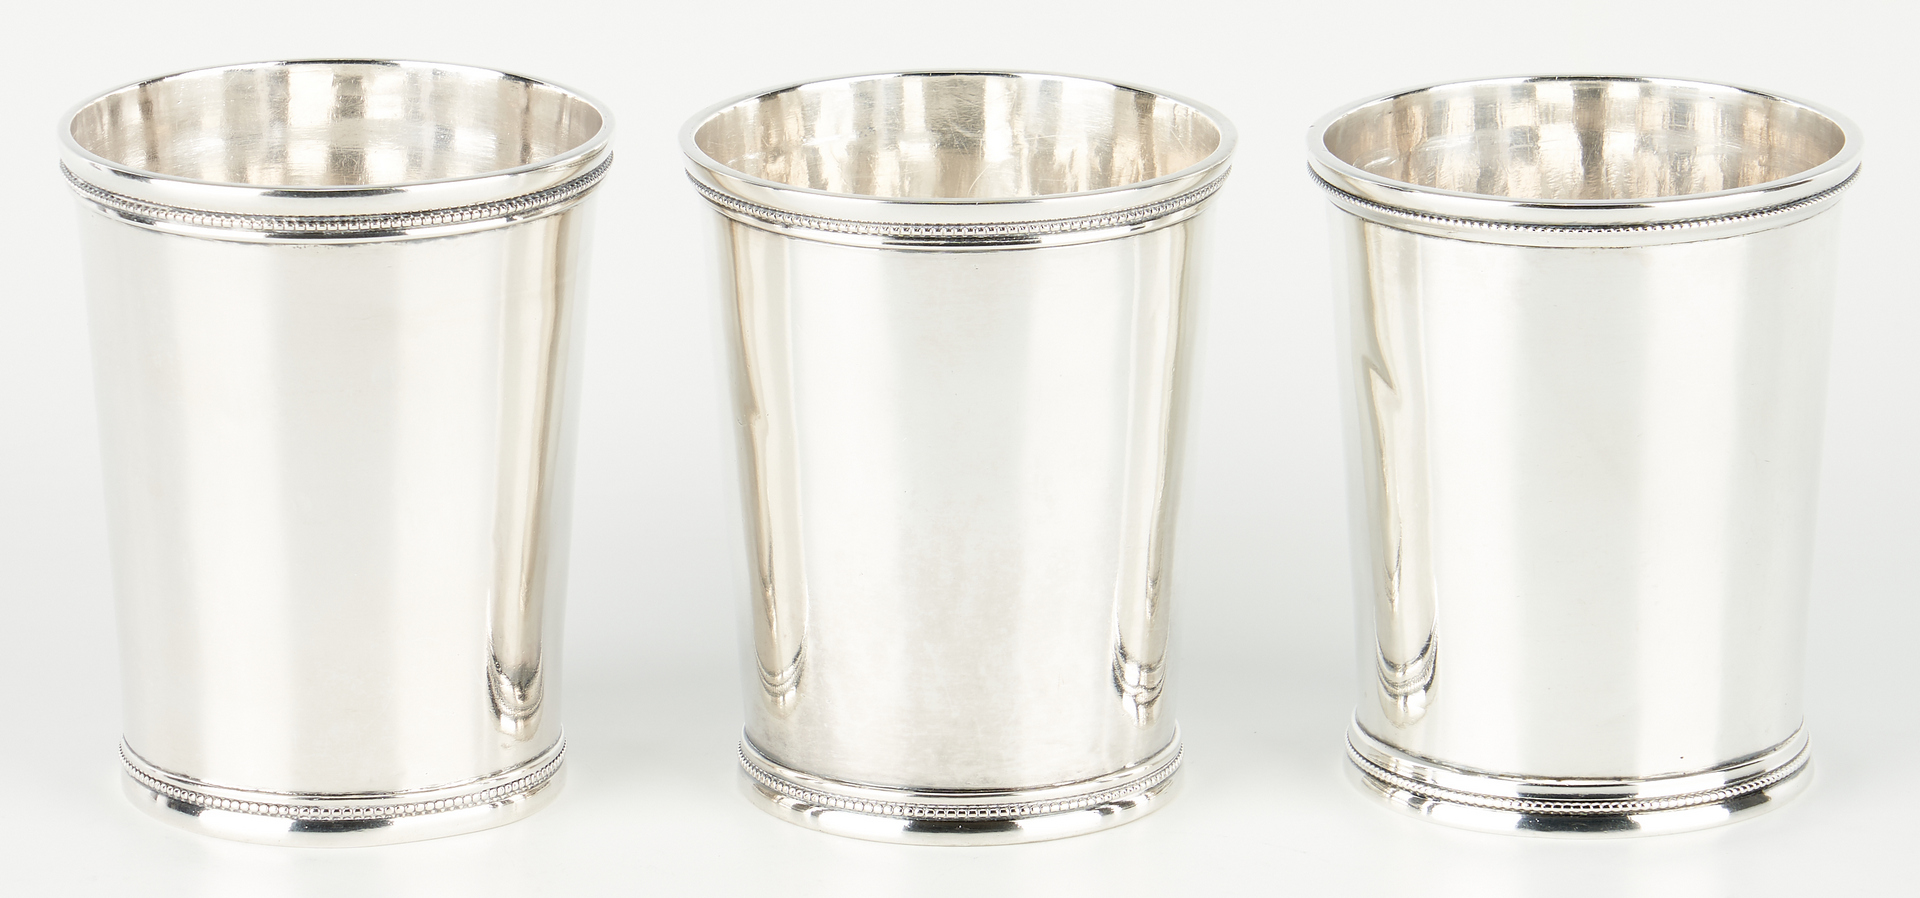 Lot 116: 3 Kitts Agricultural Premium Mint Julep cups, Mallory